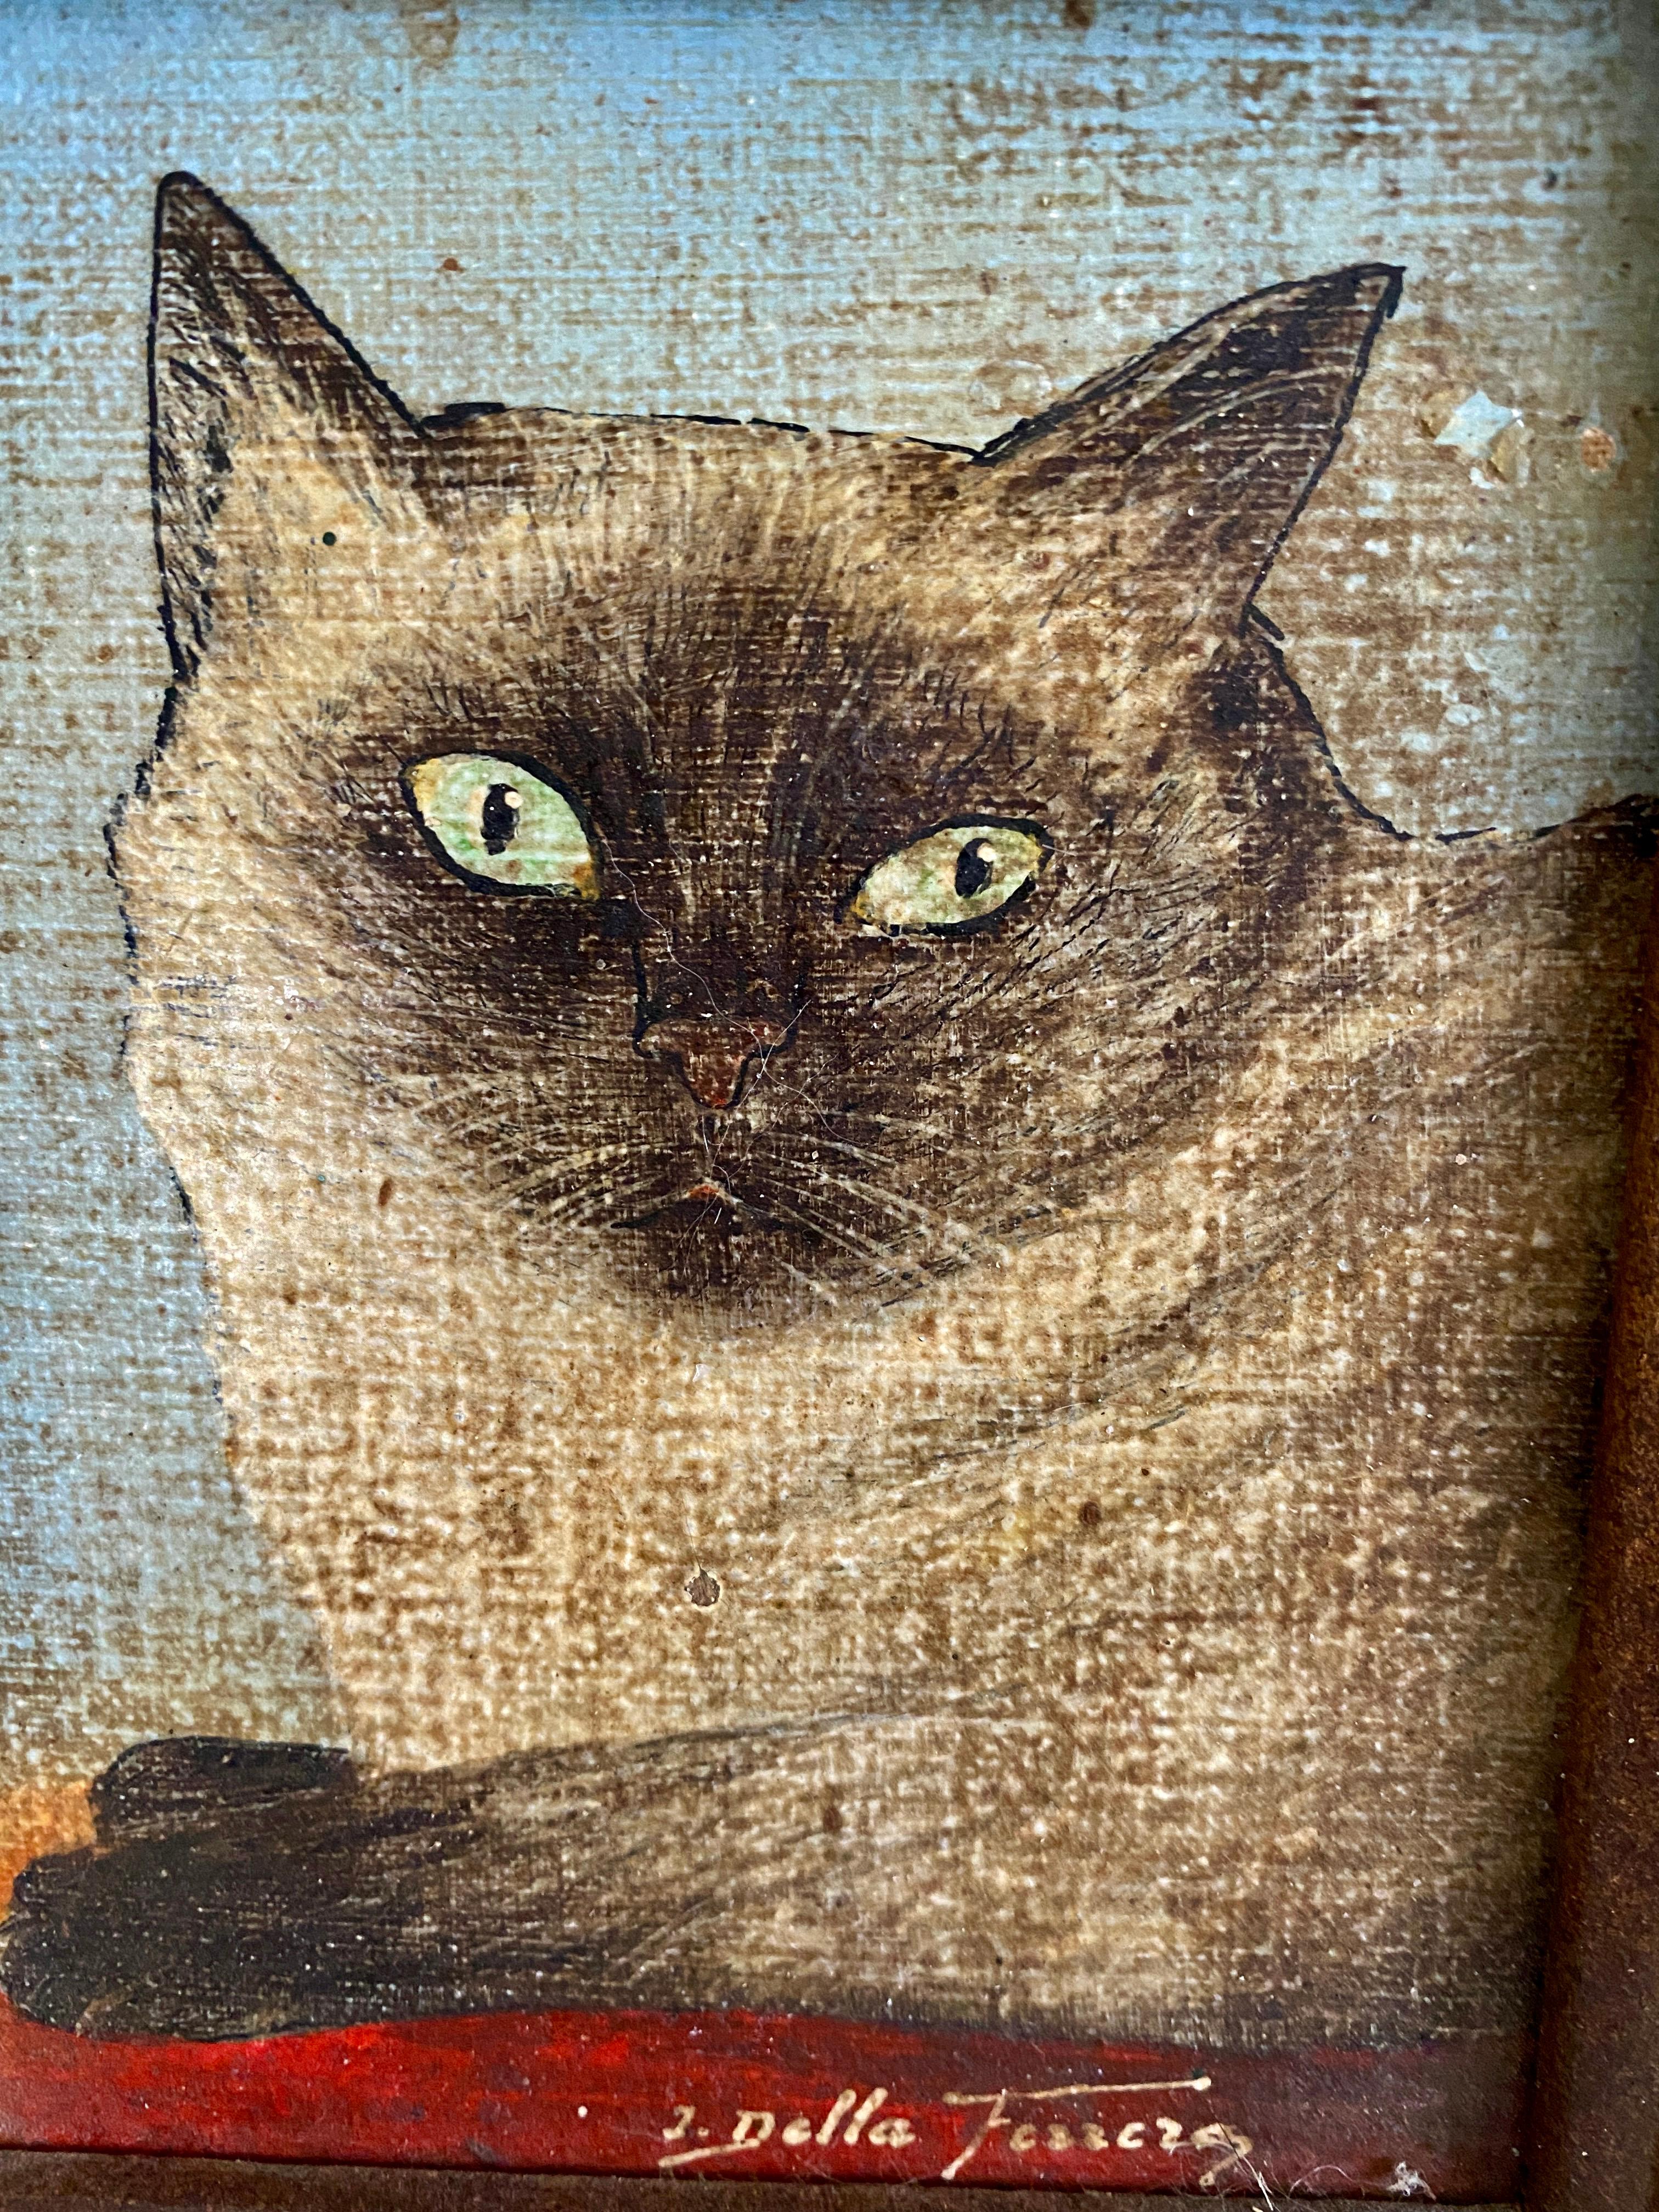 For the Siamese cat lover, a wonderful rendering of a signed Siamese cat painting, oil on board in an antique frame. Whether a gift for someone or yourself, a lovely painting to add to any collection.
Measures: 4 x 5 cat.